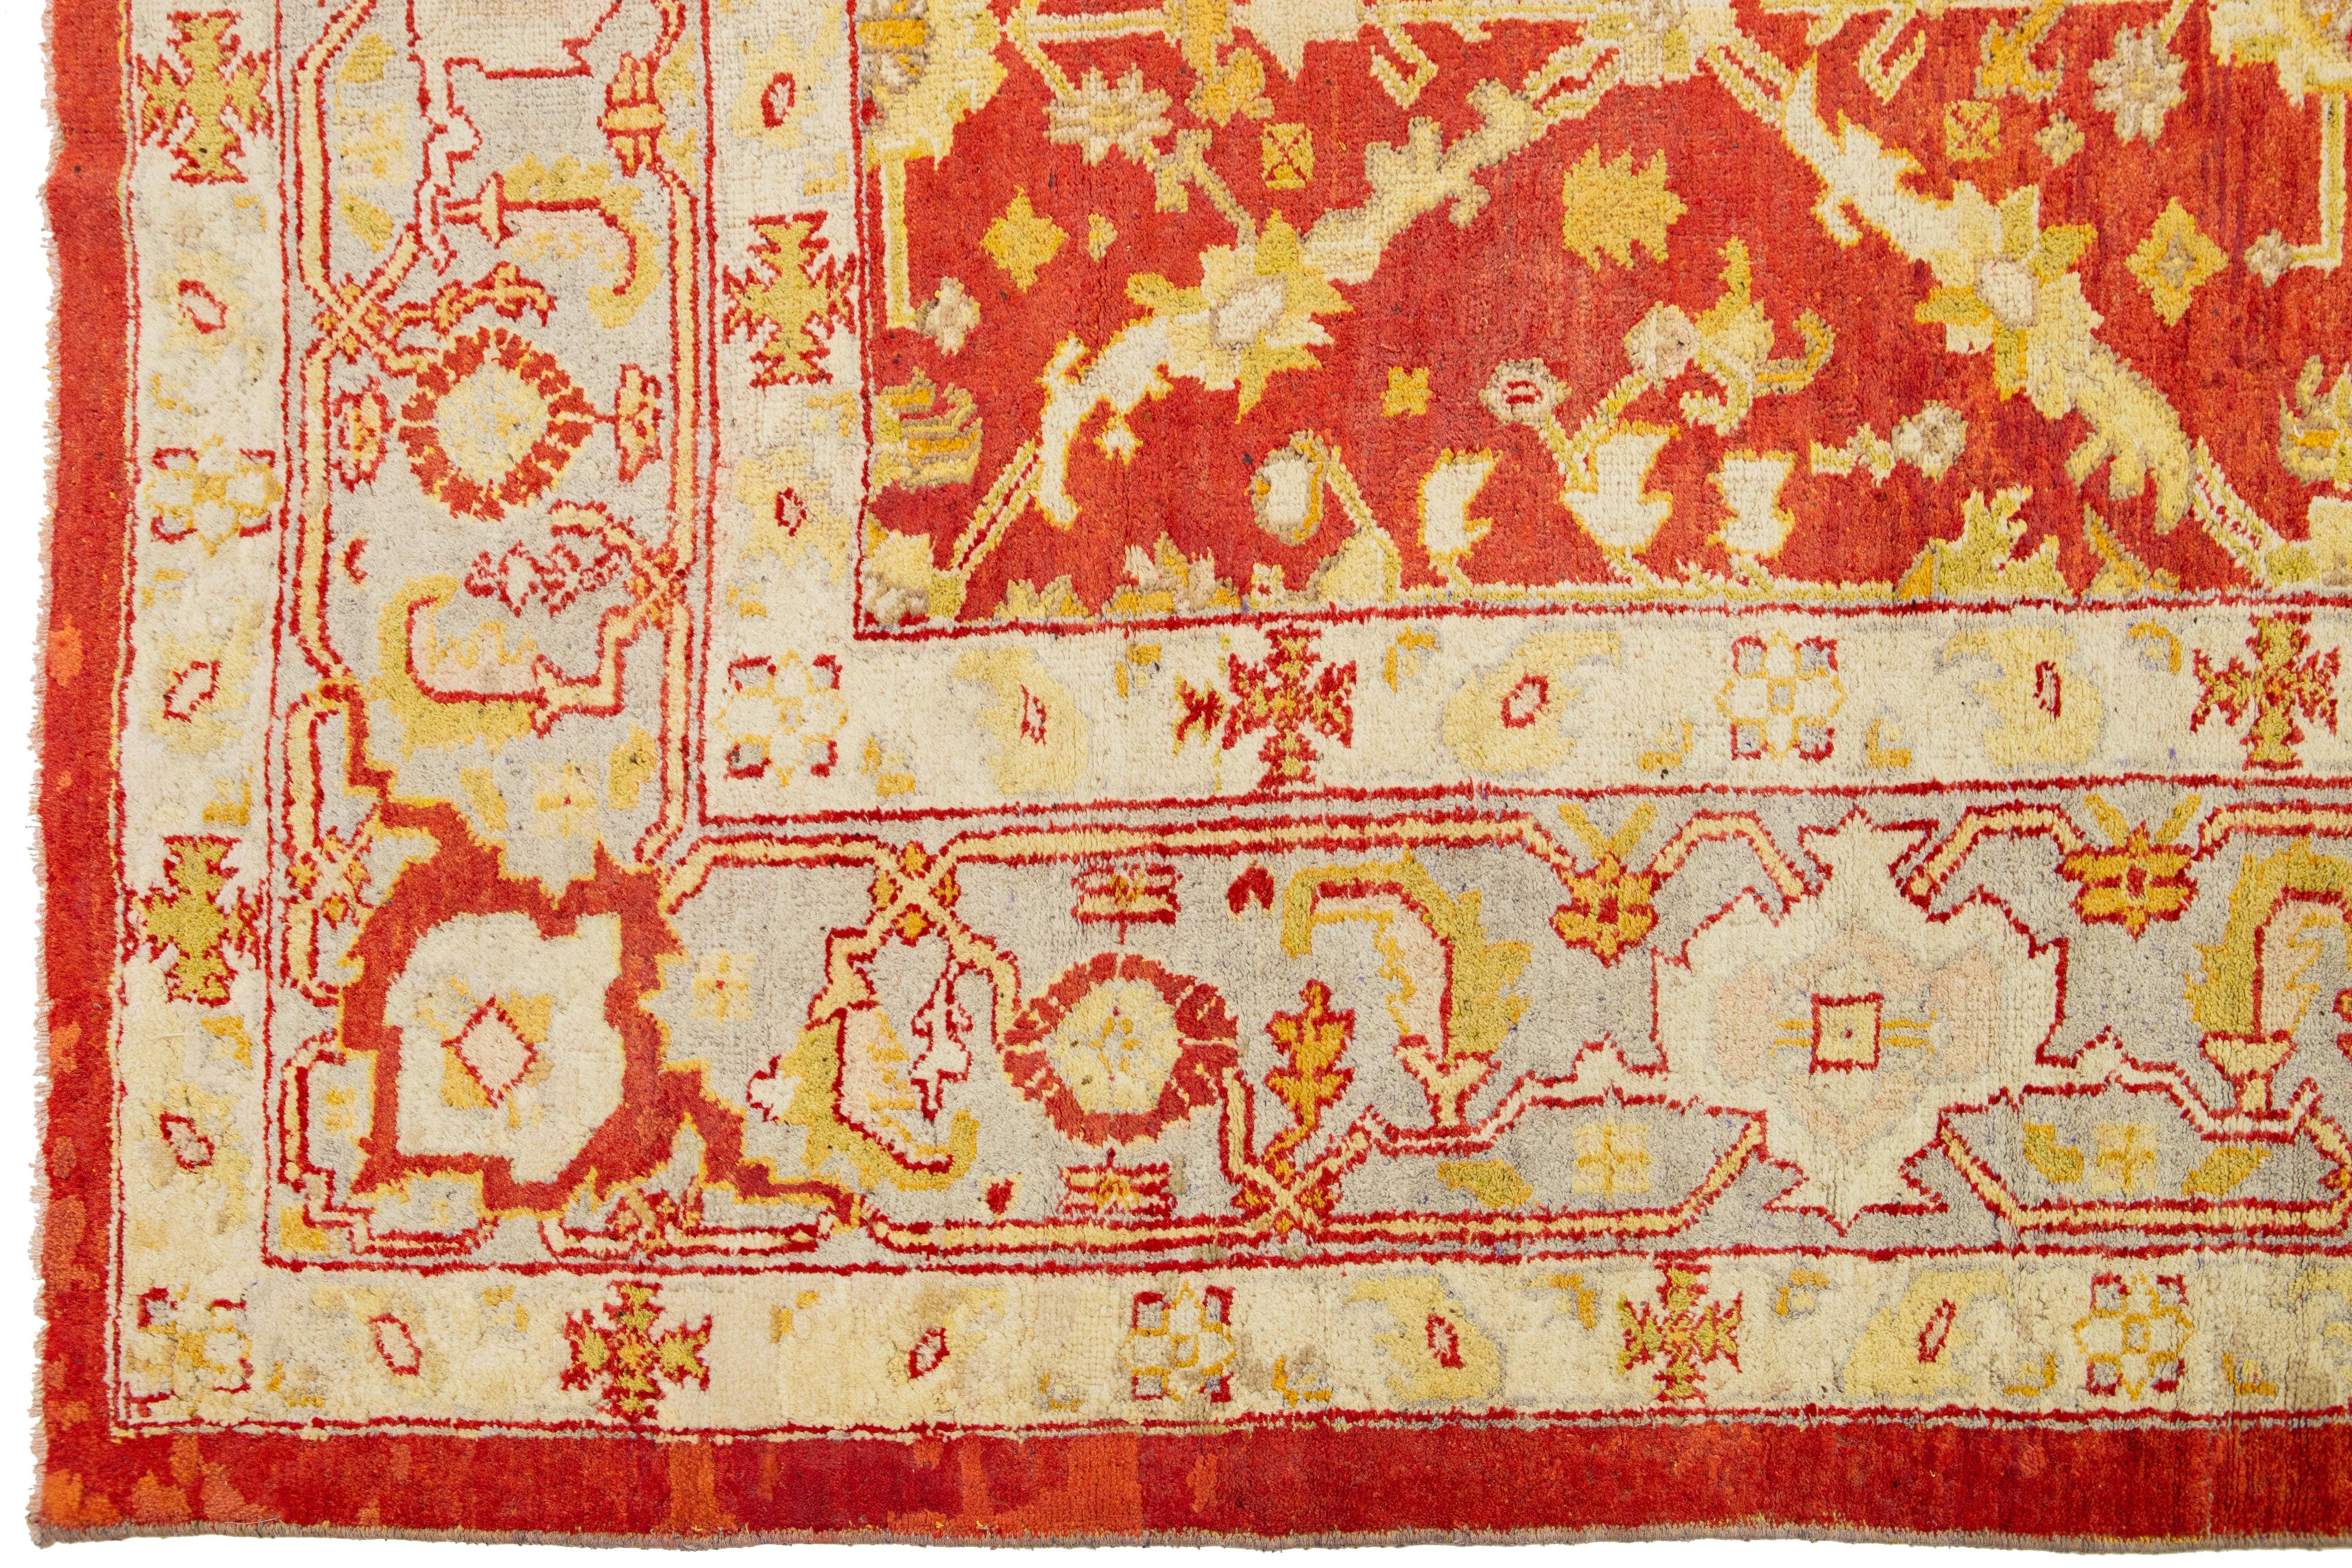 19th Century Handmade Red Turkish Oushak Wool Rug Featuring a Floral Pattern From The 1880's For Sale